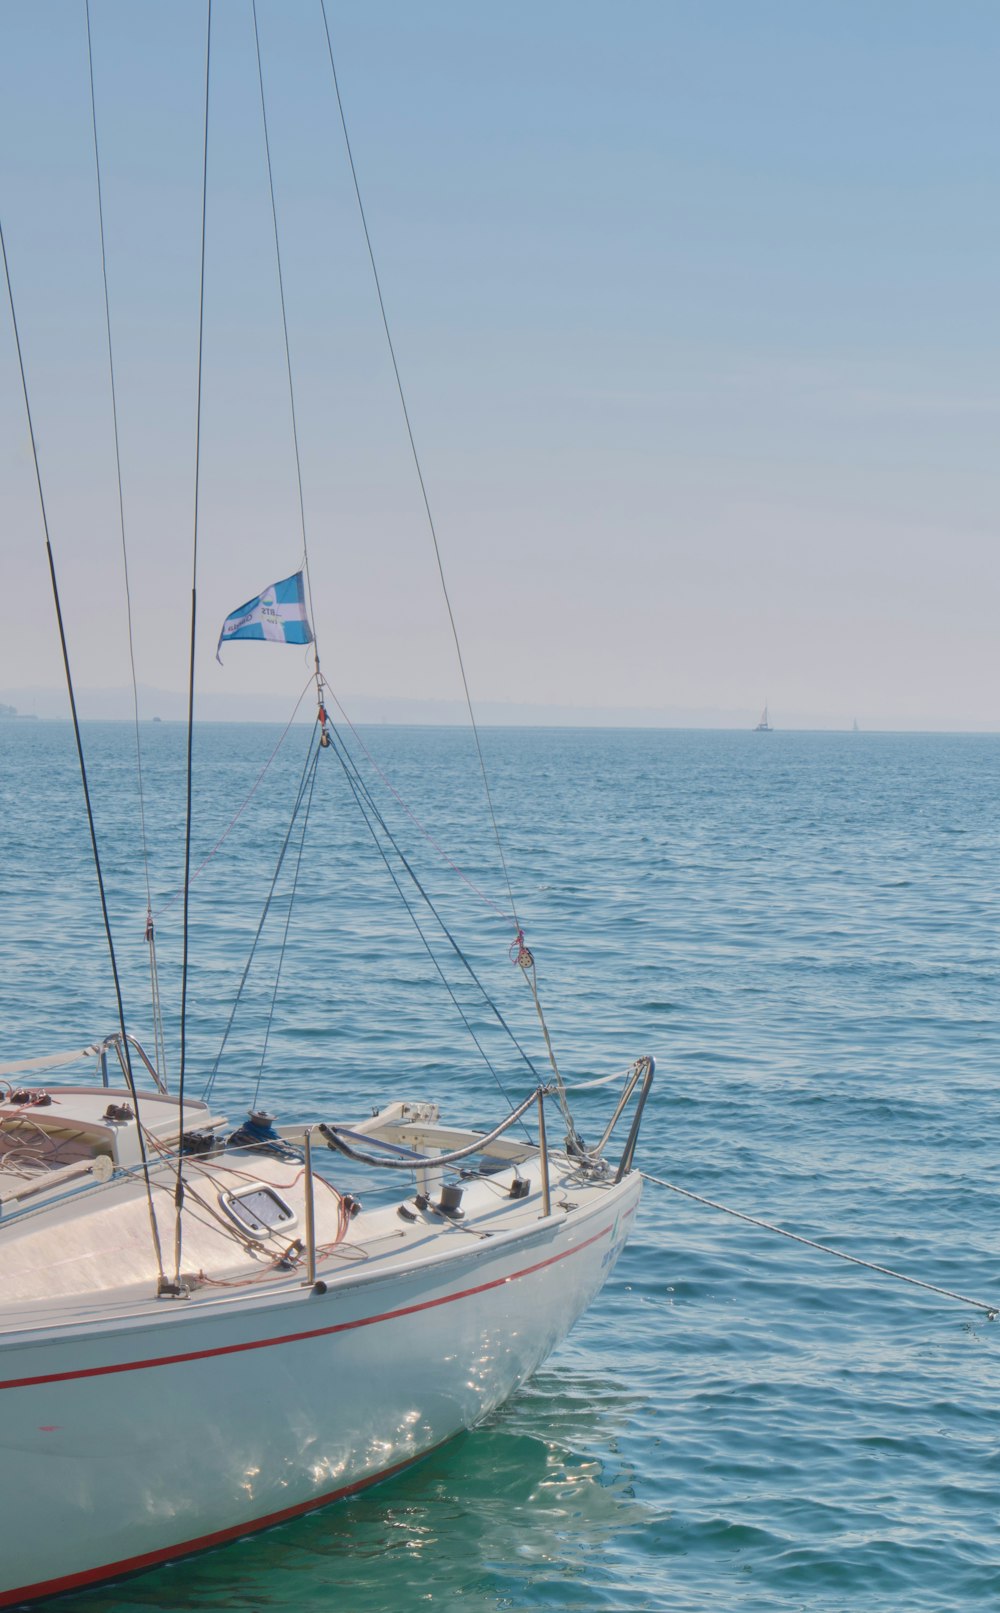 a sailboat in the water with a flag on it